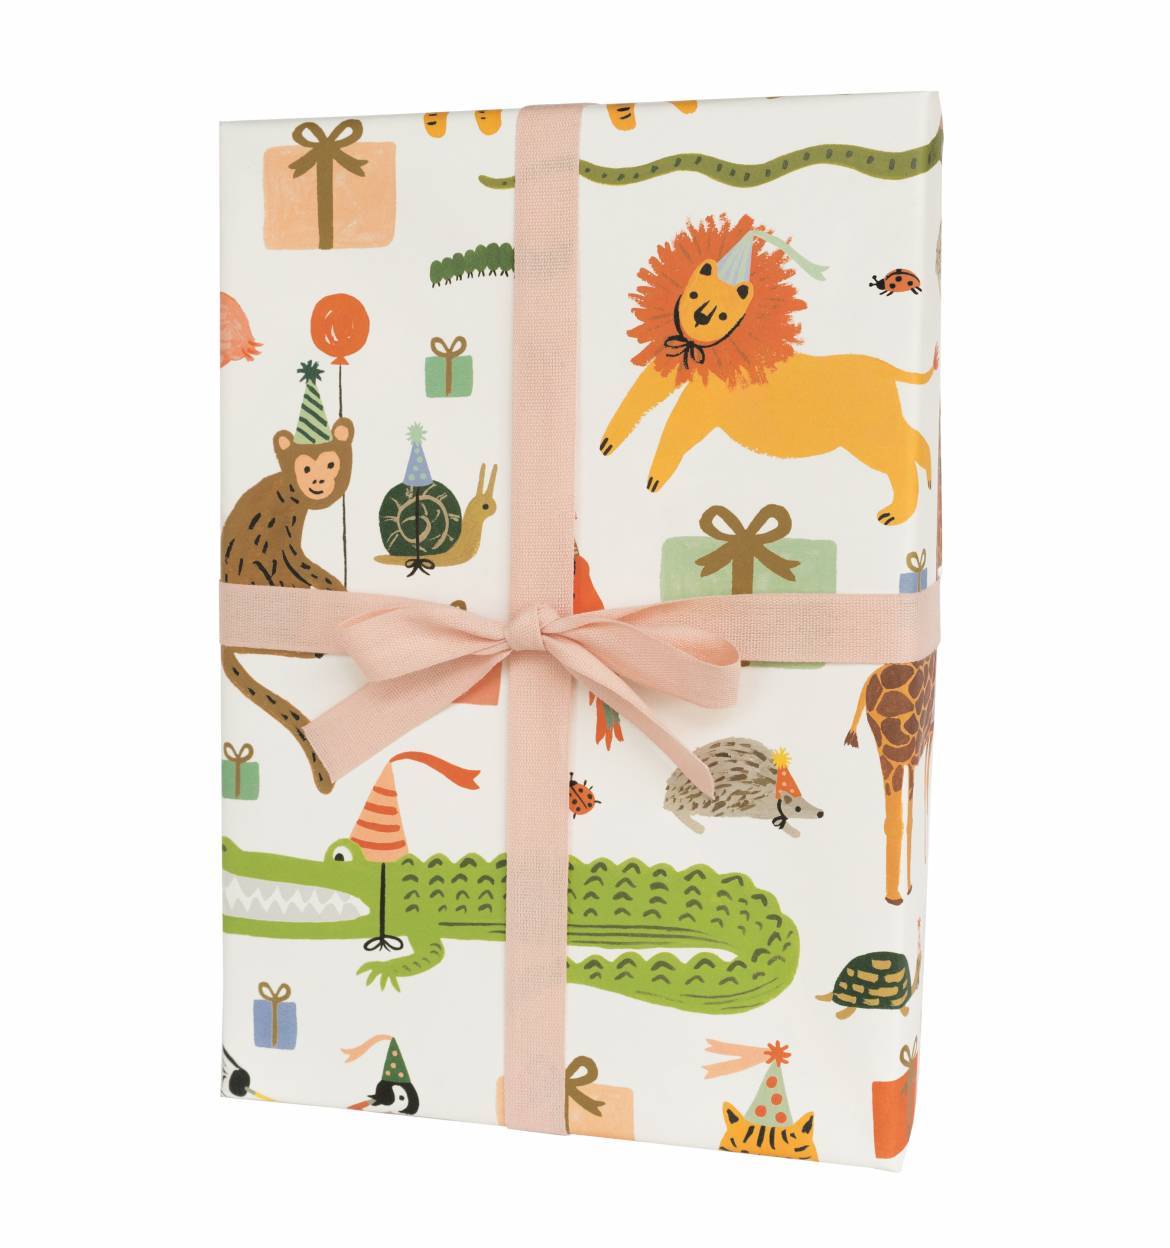 Party Animals - Single Wrapping Paper Sheet from Rifle Paper Co.